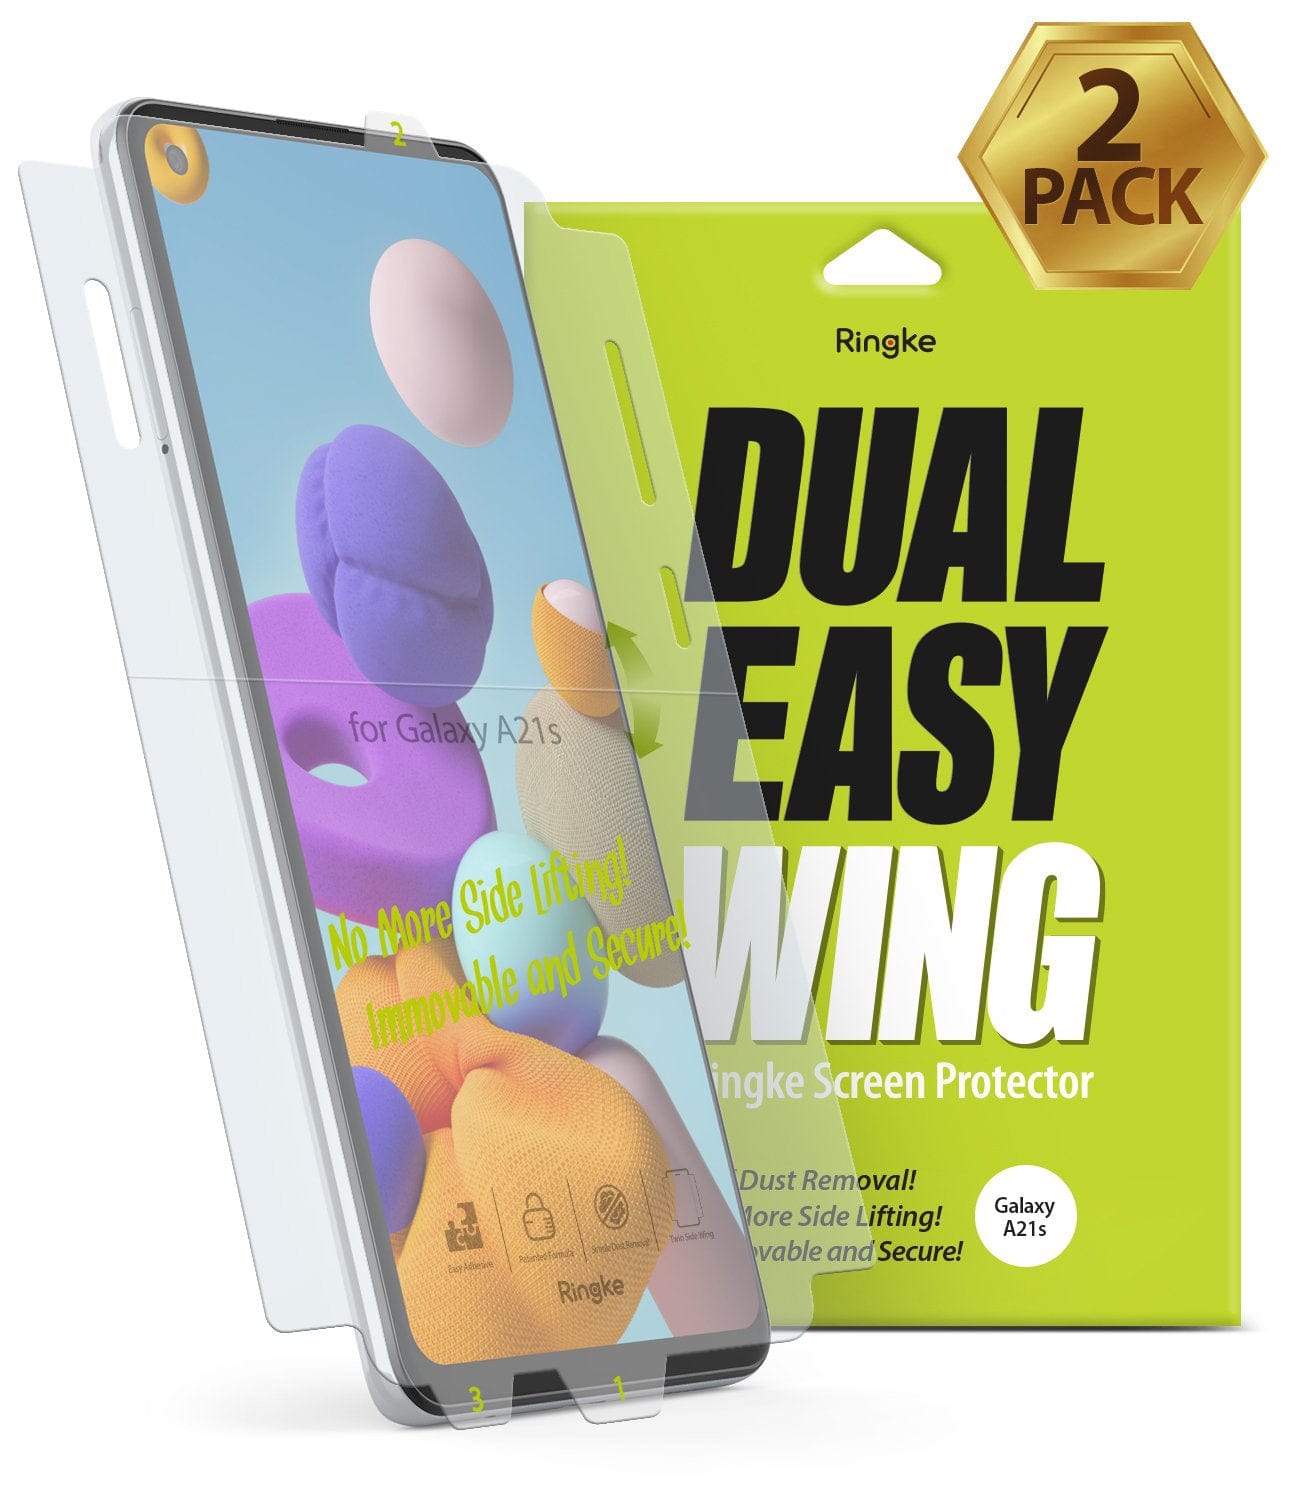 Samsung A21s Screen Protector Dual Easy Film Ringke